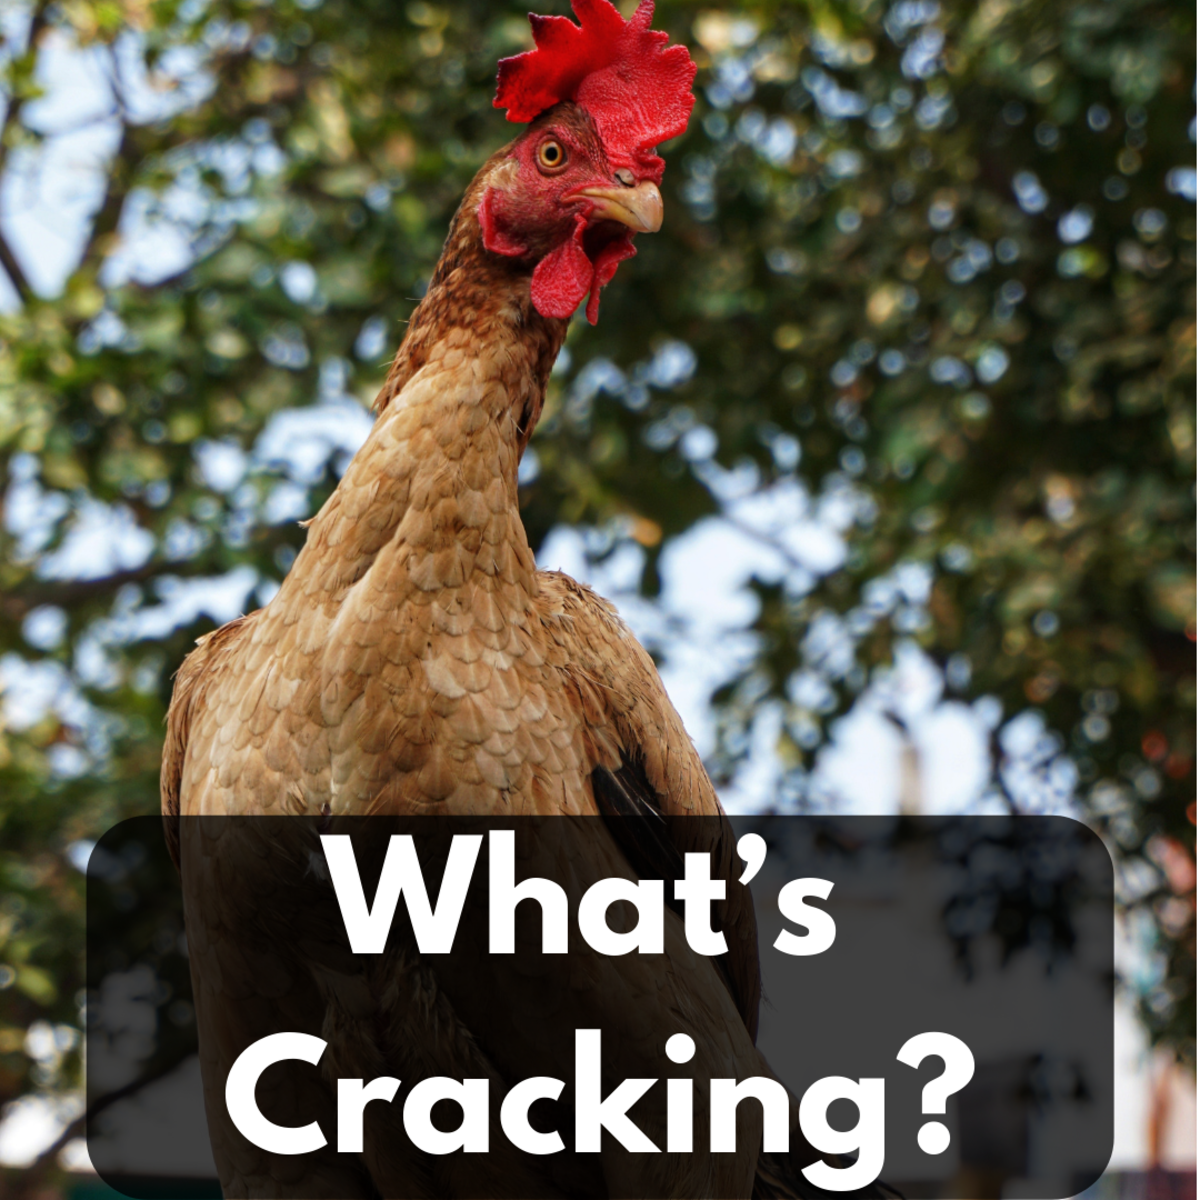 What's Cracking?